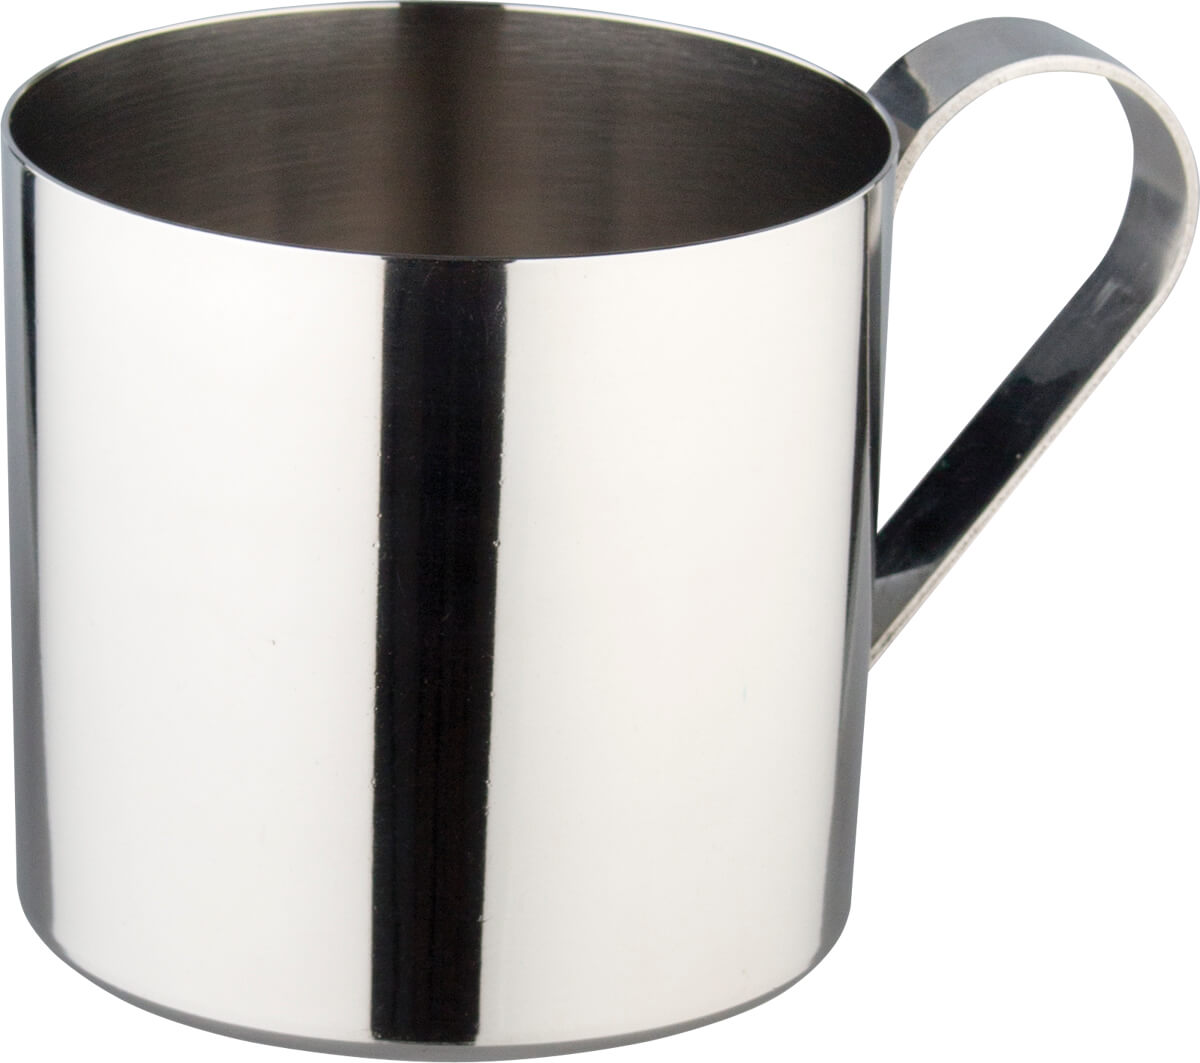 Stainless steel cup, Prime Bar - stainless steel (350ml)